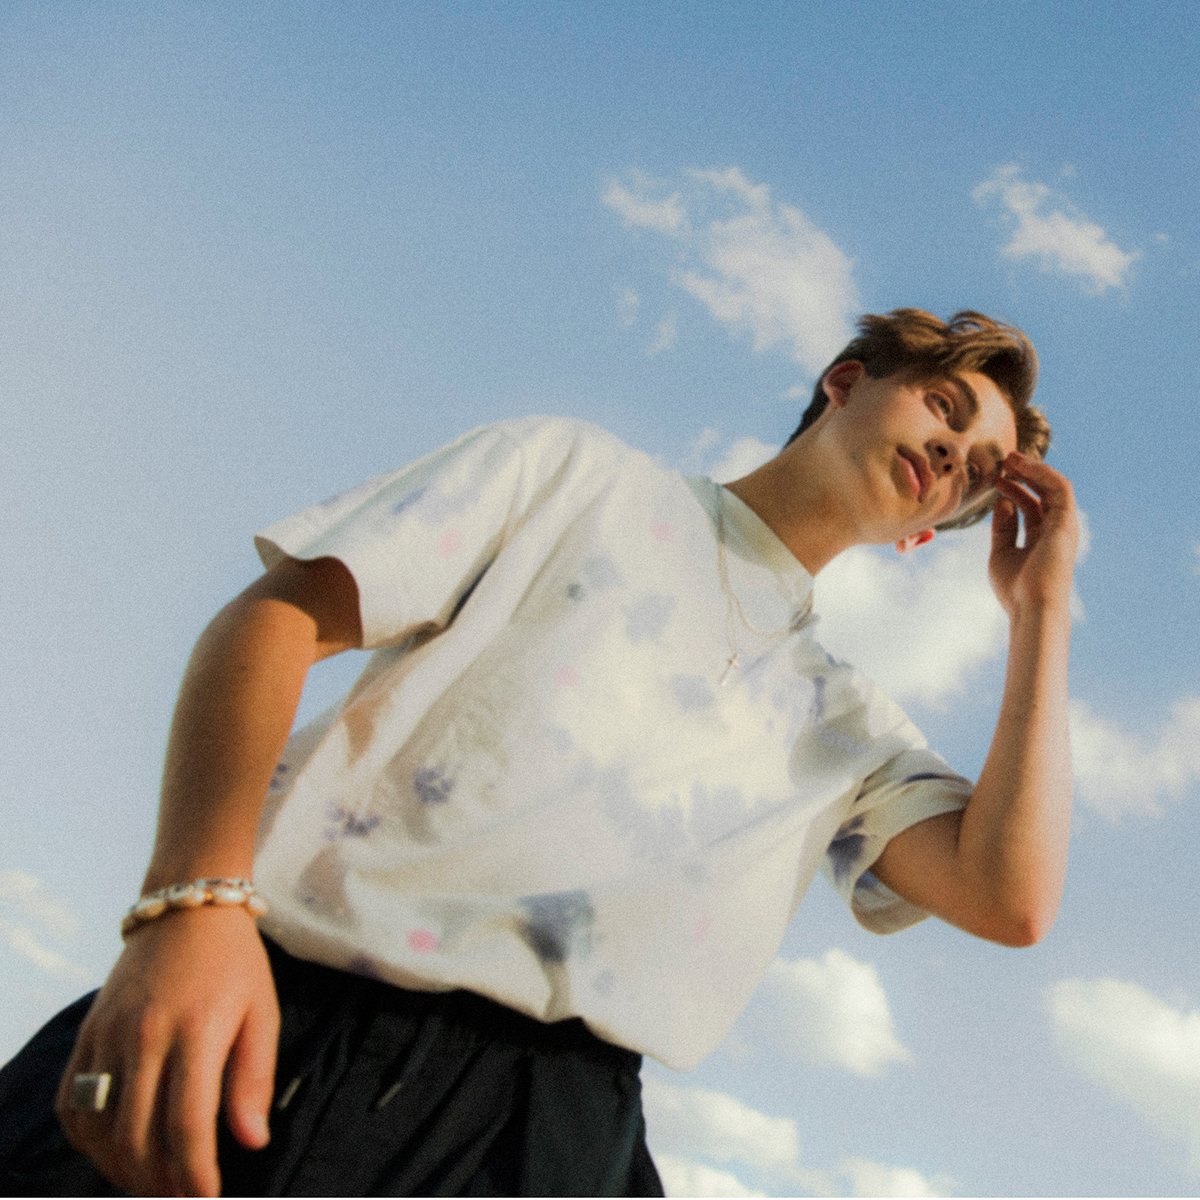 Johnny Orlando Announces 13-Date Virtual It’s Never Really Over World Tour In Support Of New EP